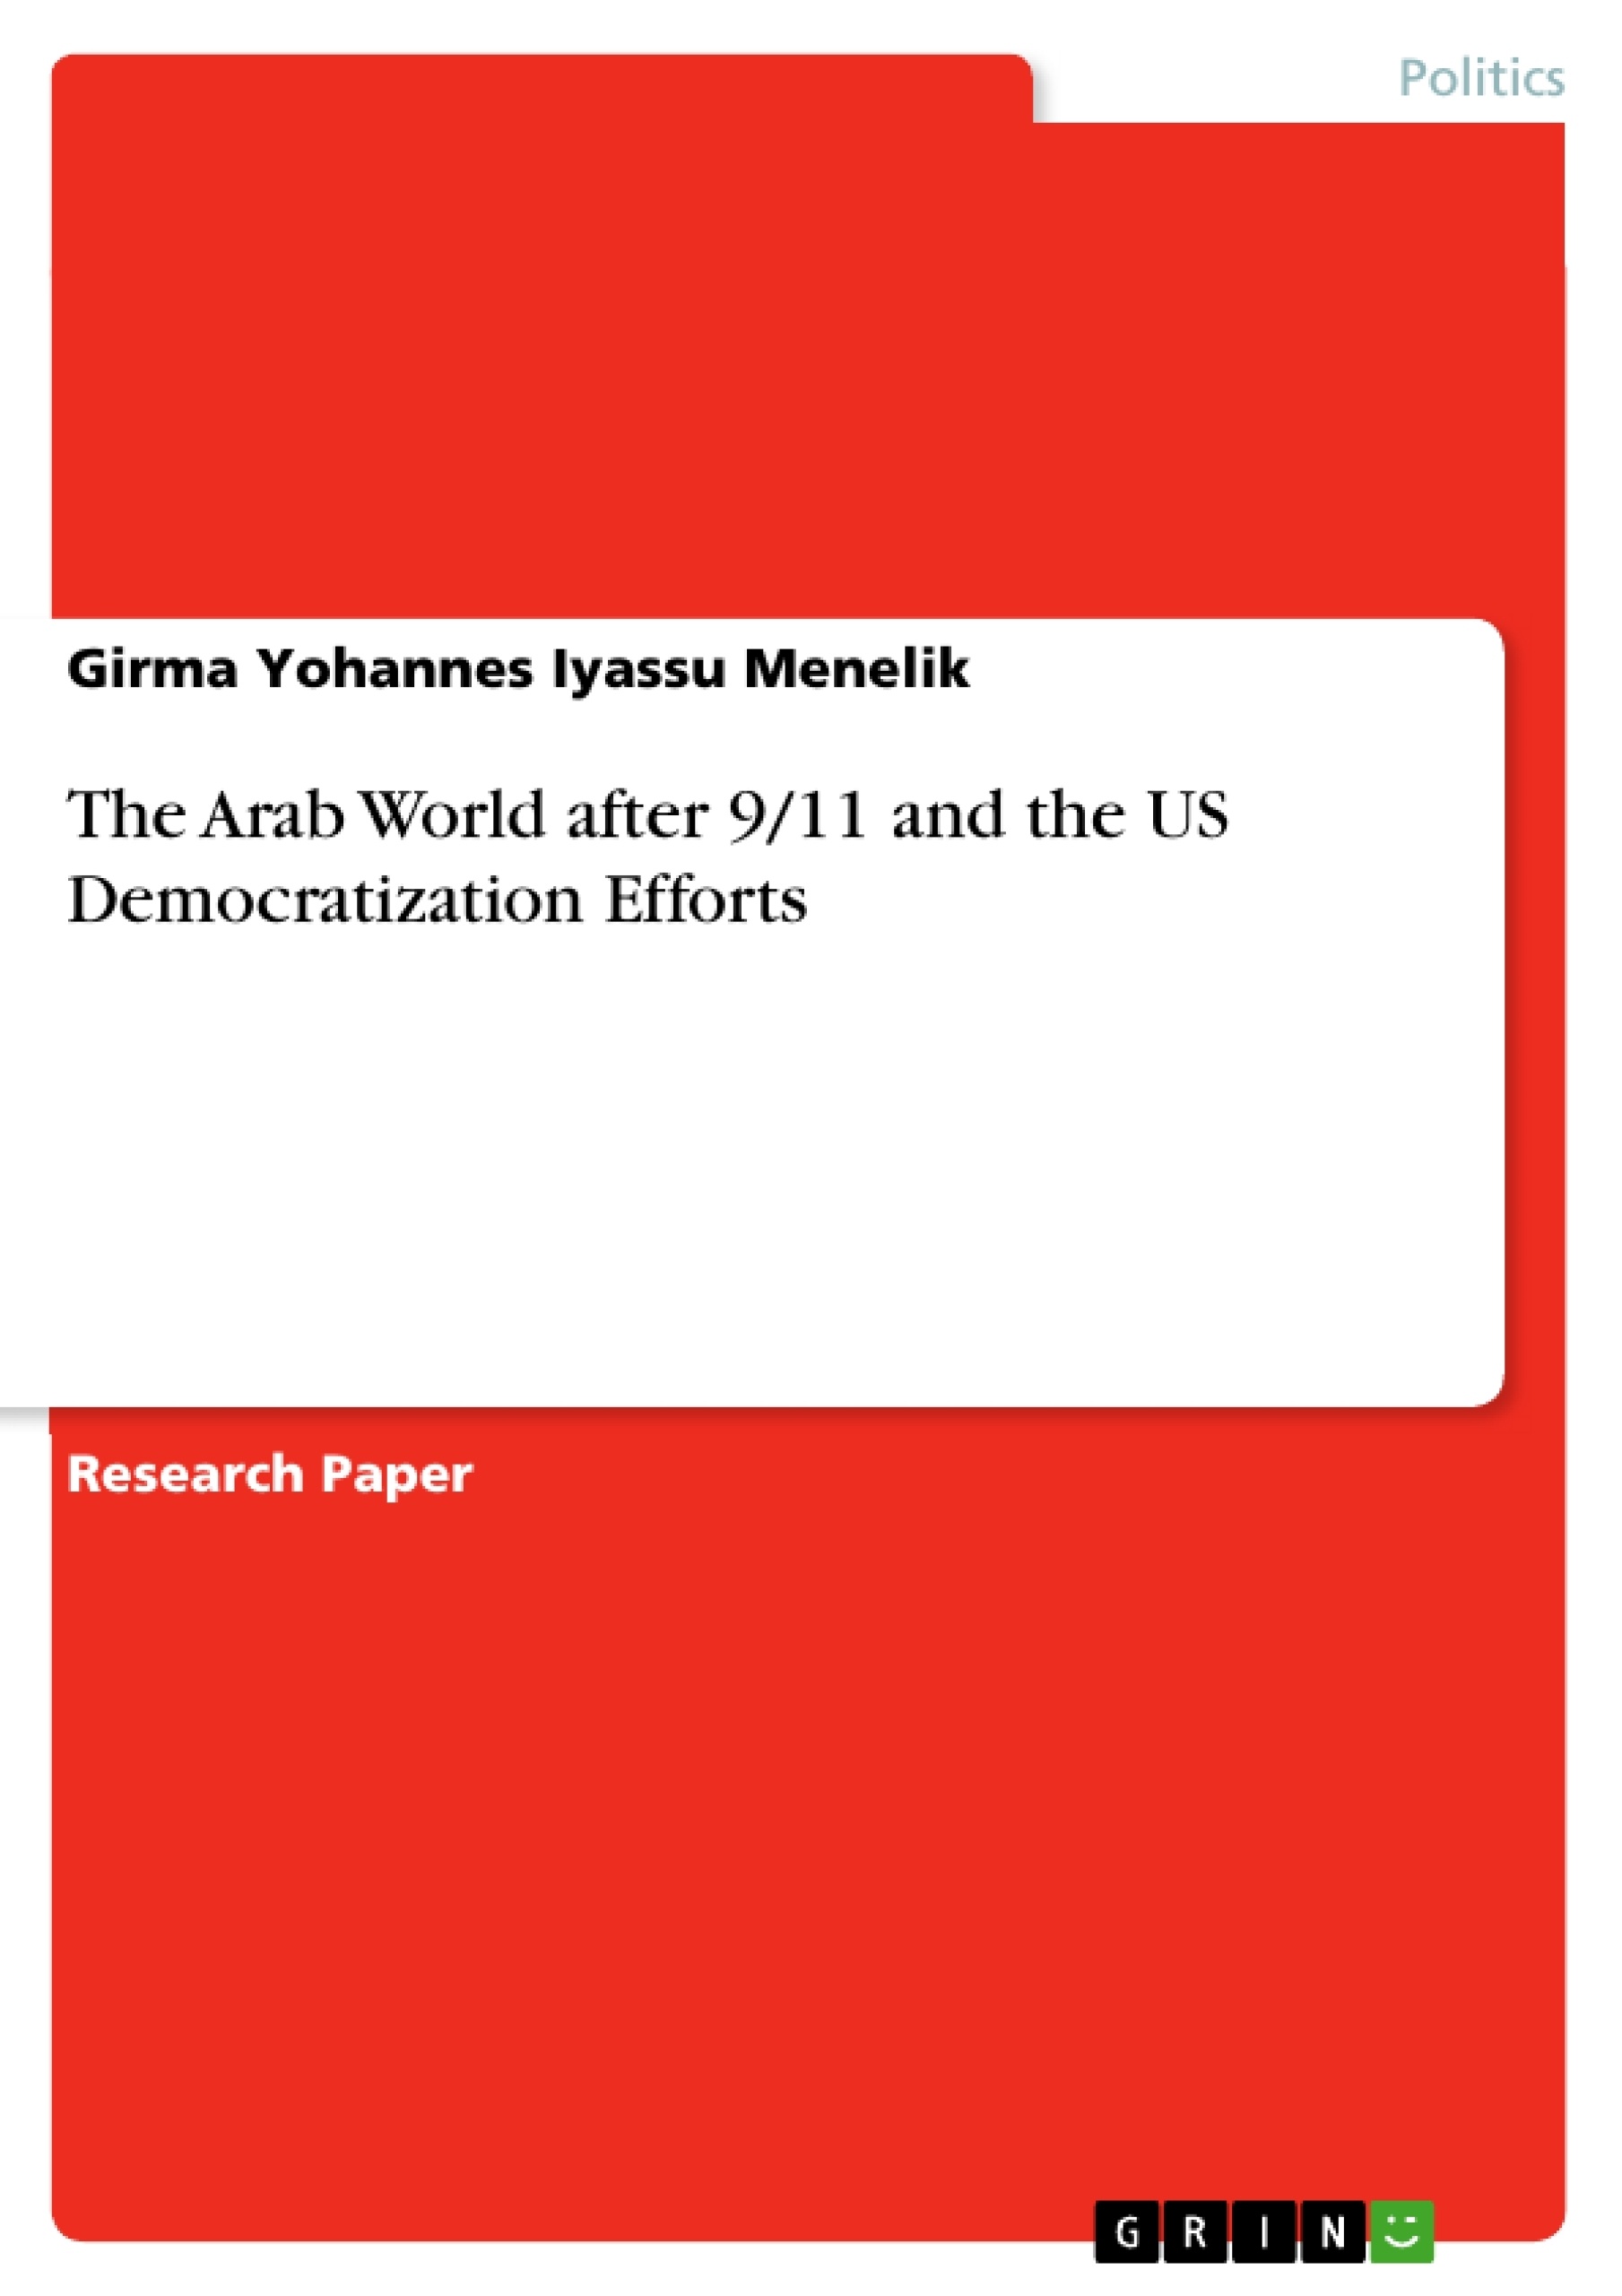 Title: The Arab World after 9/11 and the US Democratization Efforts